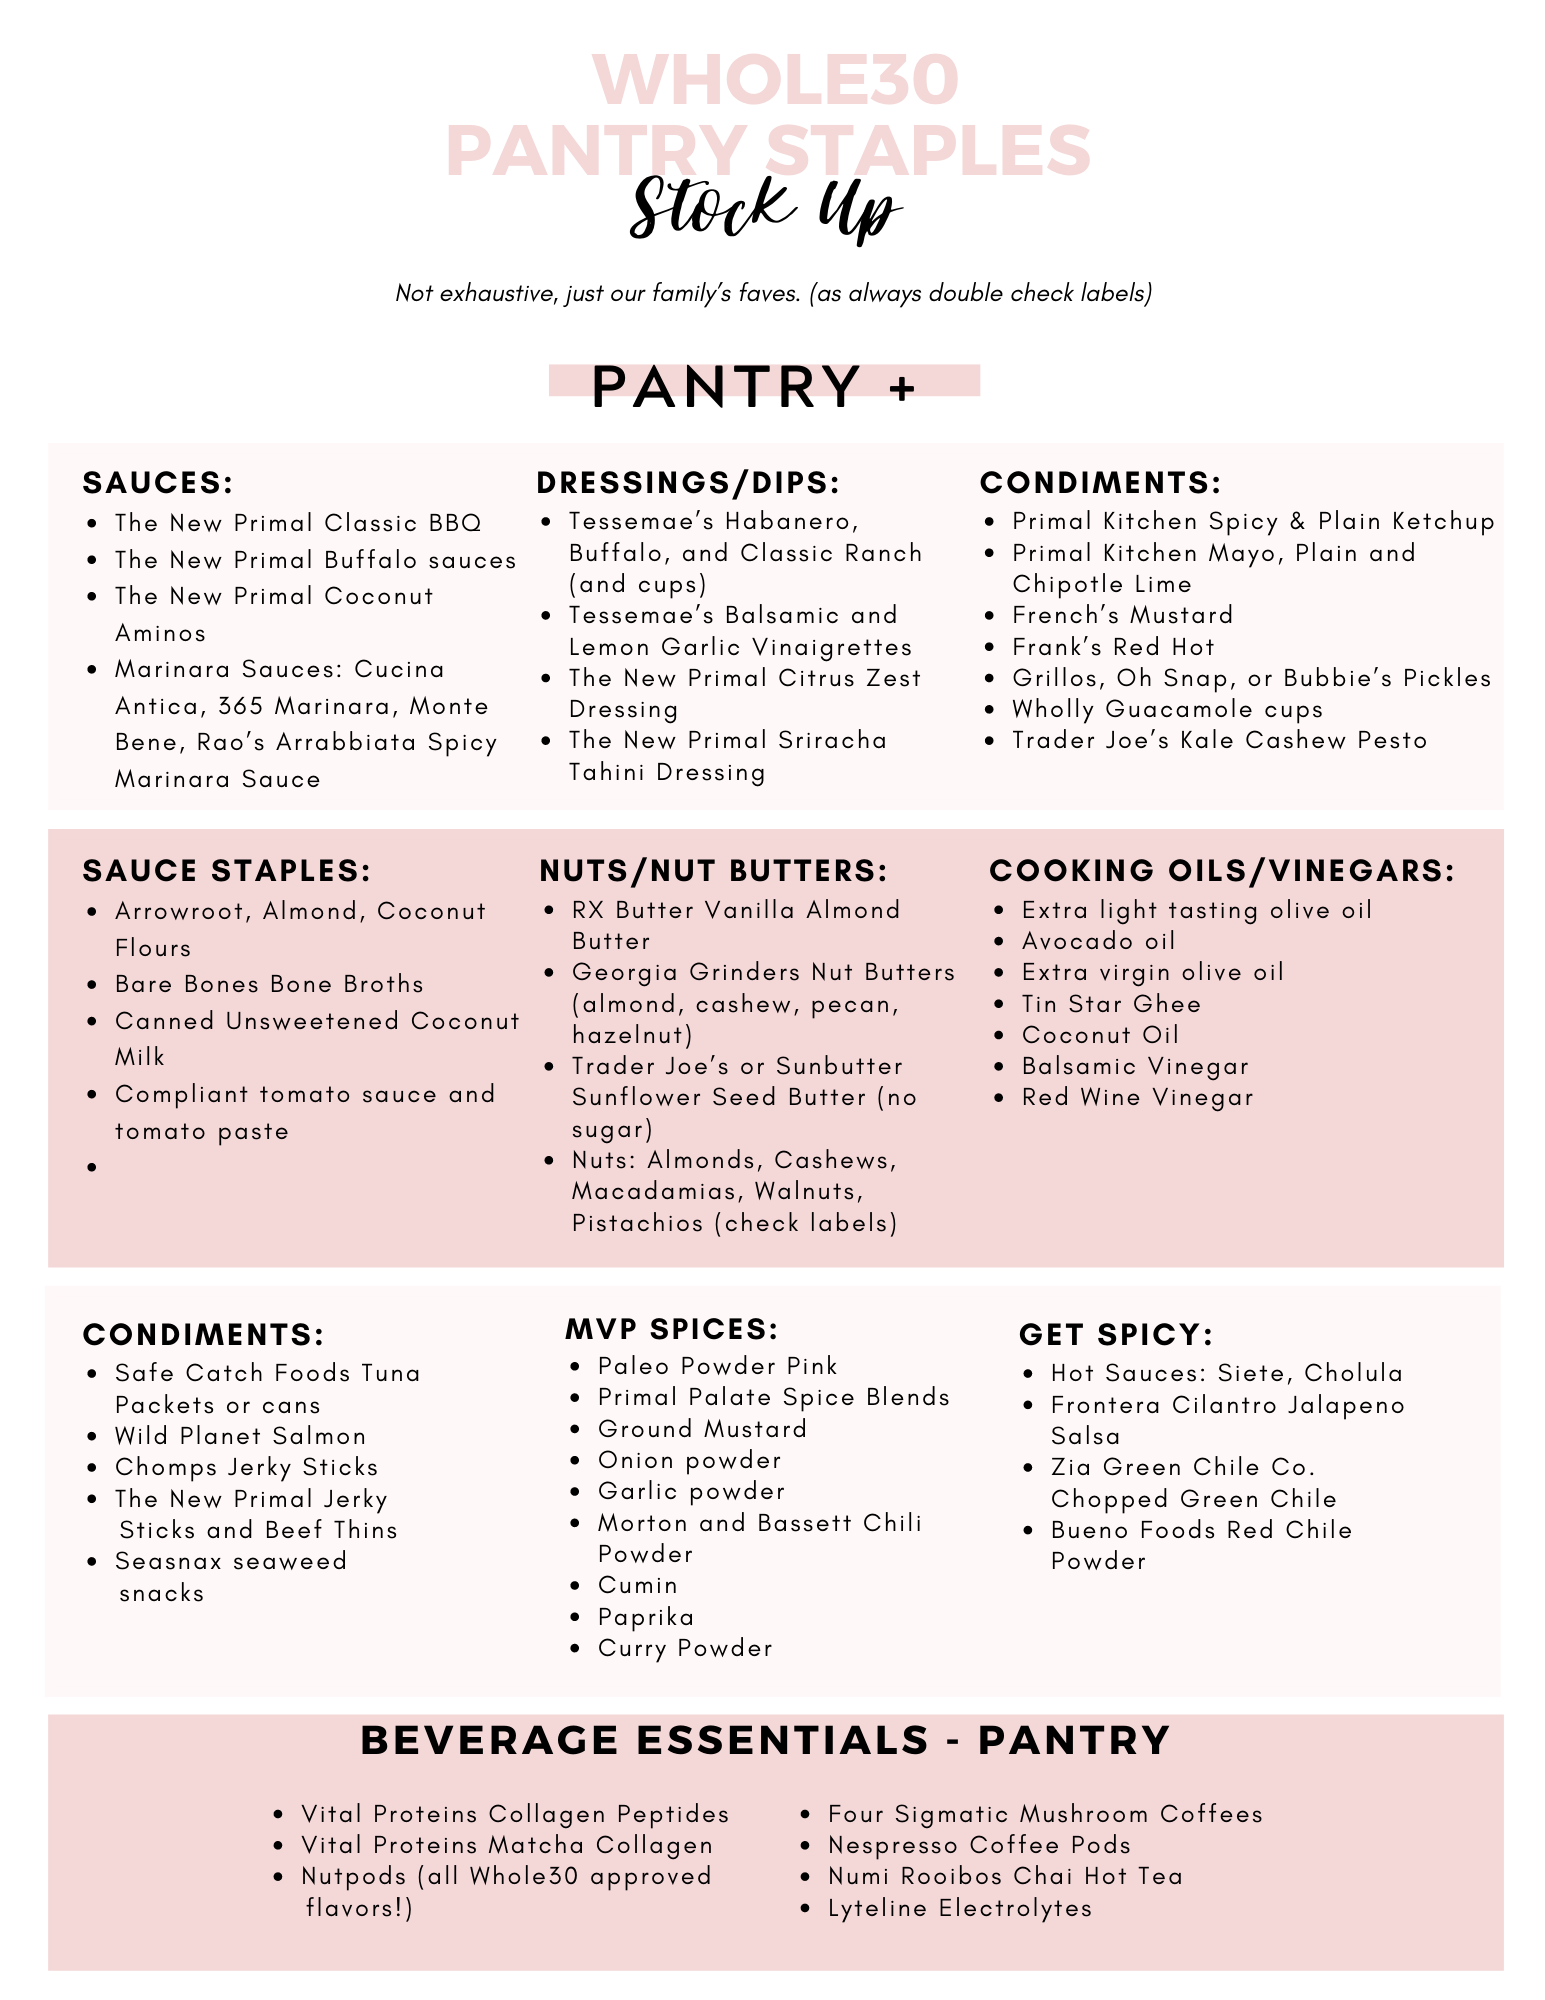 Whole30 Pantry and Fridge Stocking Guide